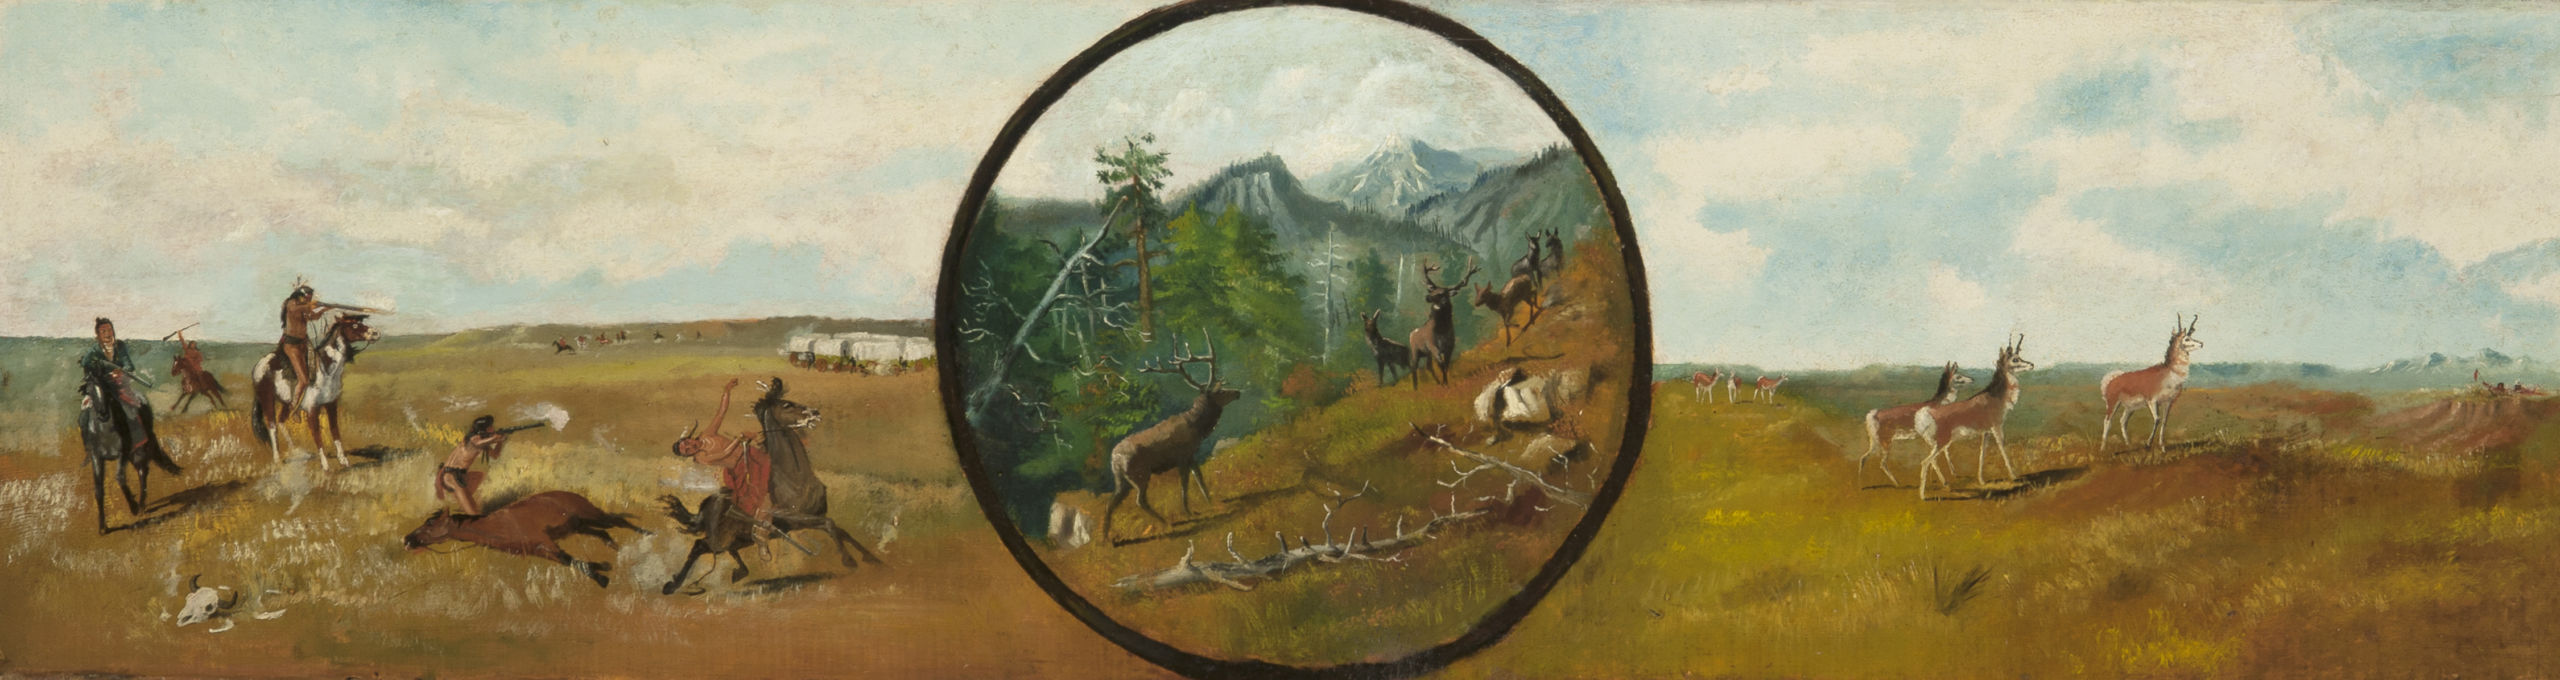 Divided into three scenes, on the left is a wagon train surrounded by indigenous Americans; at far right, antelope and hunters; and in the center circle, a herd of elk in a mountain forest.